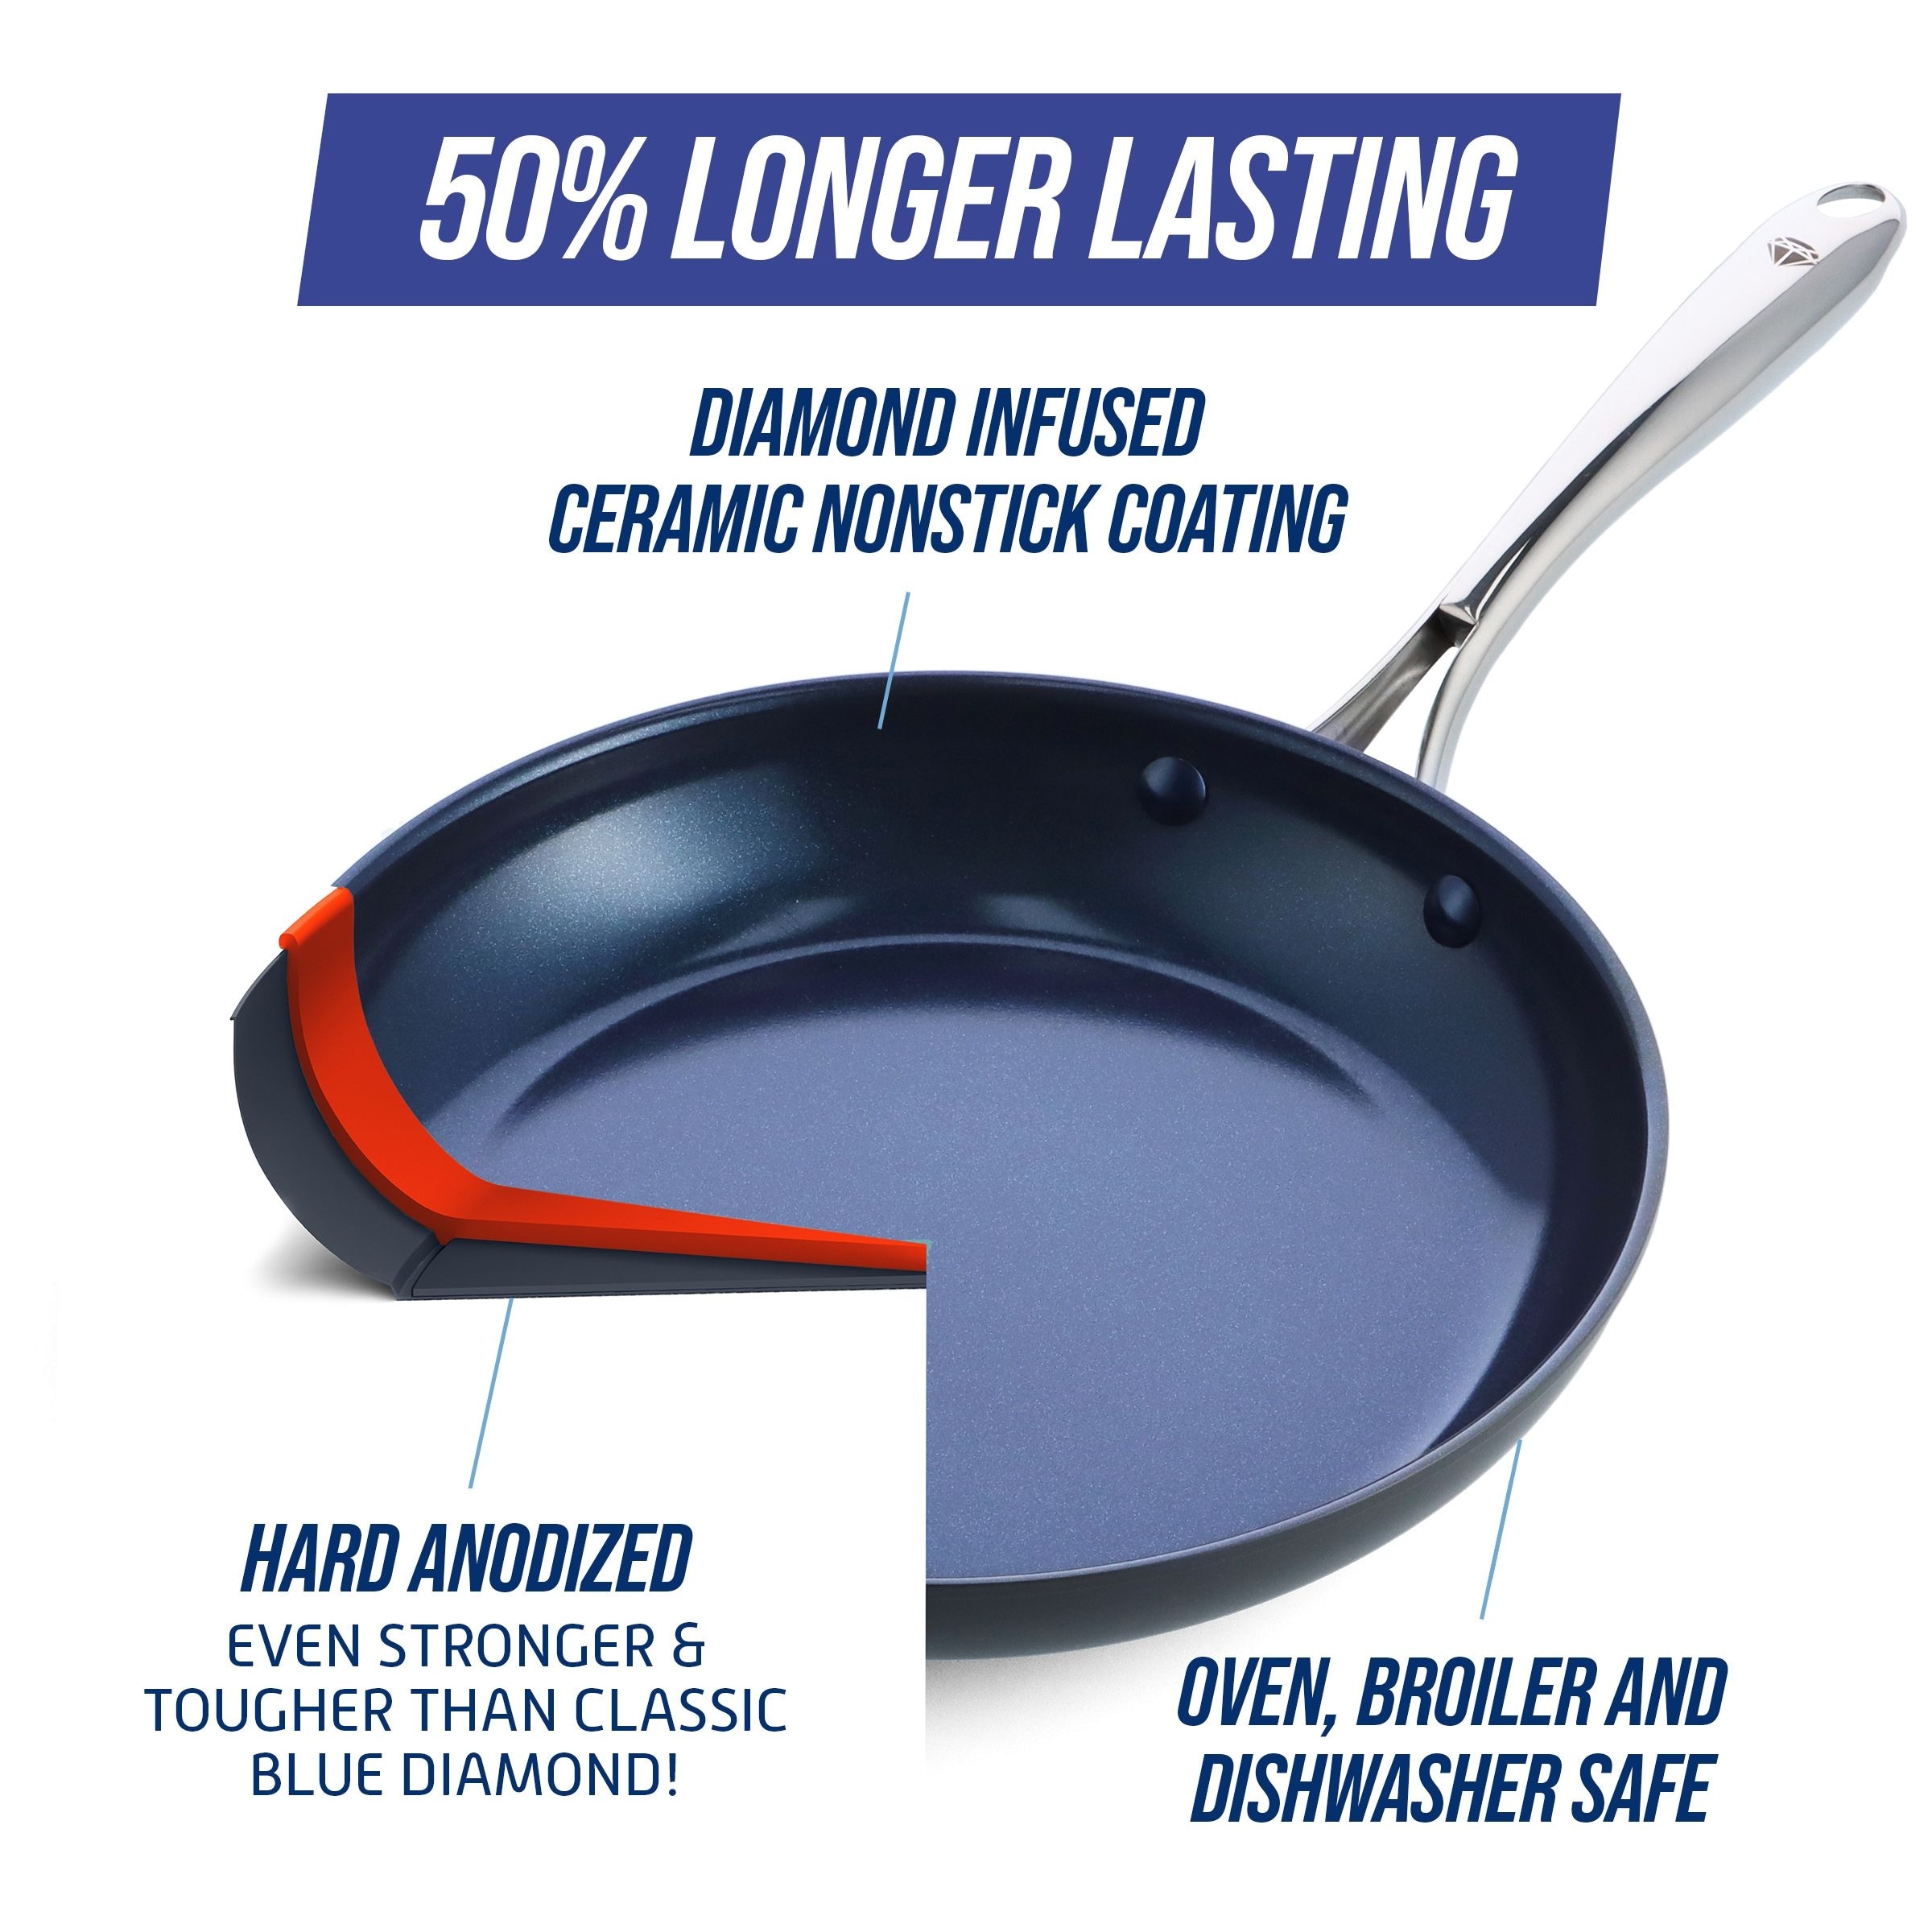 https://ak1.ostkcdn.com/images/products/is/images/direct/fff8ce18f27bc99103647b920da1e30042f10912/Blue-Diamond-Hard-Anodized-Toxin-Free-Ceramic-Nonstick-Dishwasher%2C-Oven%2C-Broiler%2C-Metal-Utensil-Safe-Frying-Pan-Set%2C-10%22-and-12%22.jpg